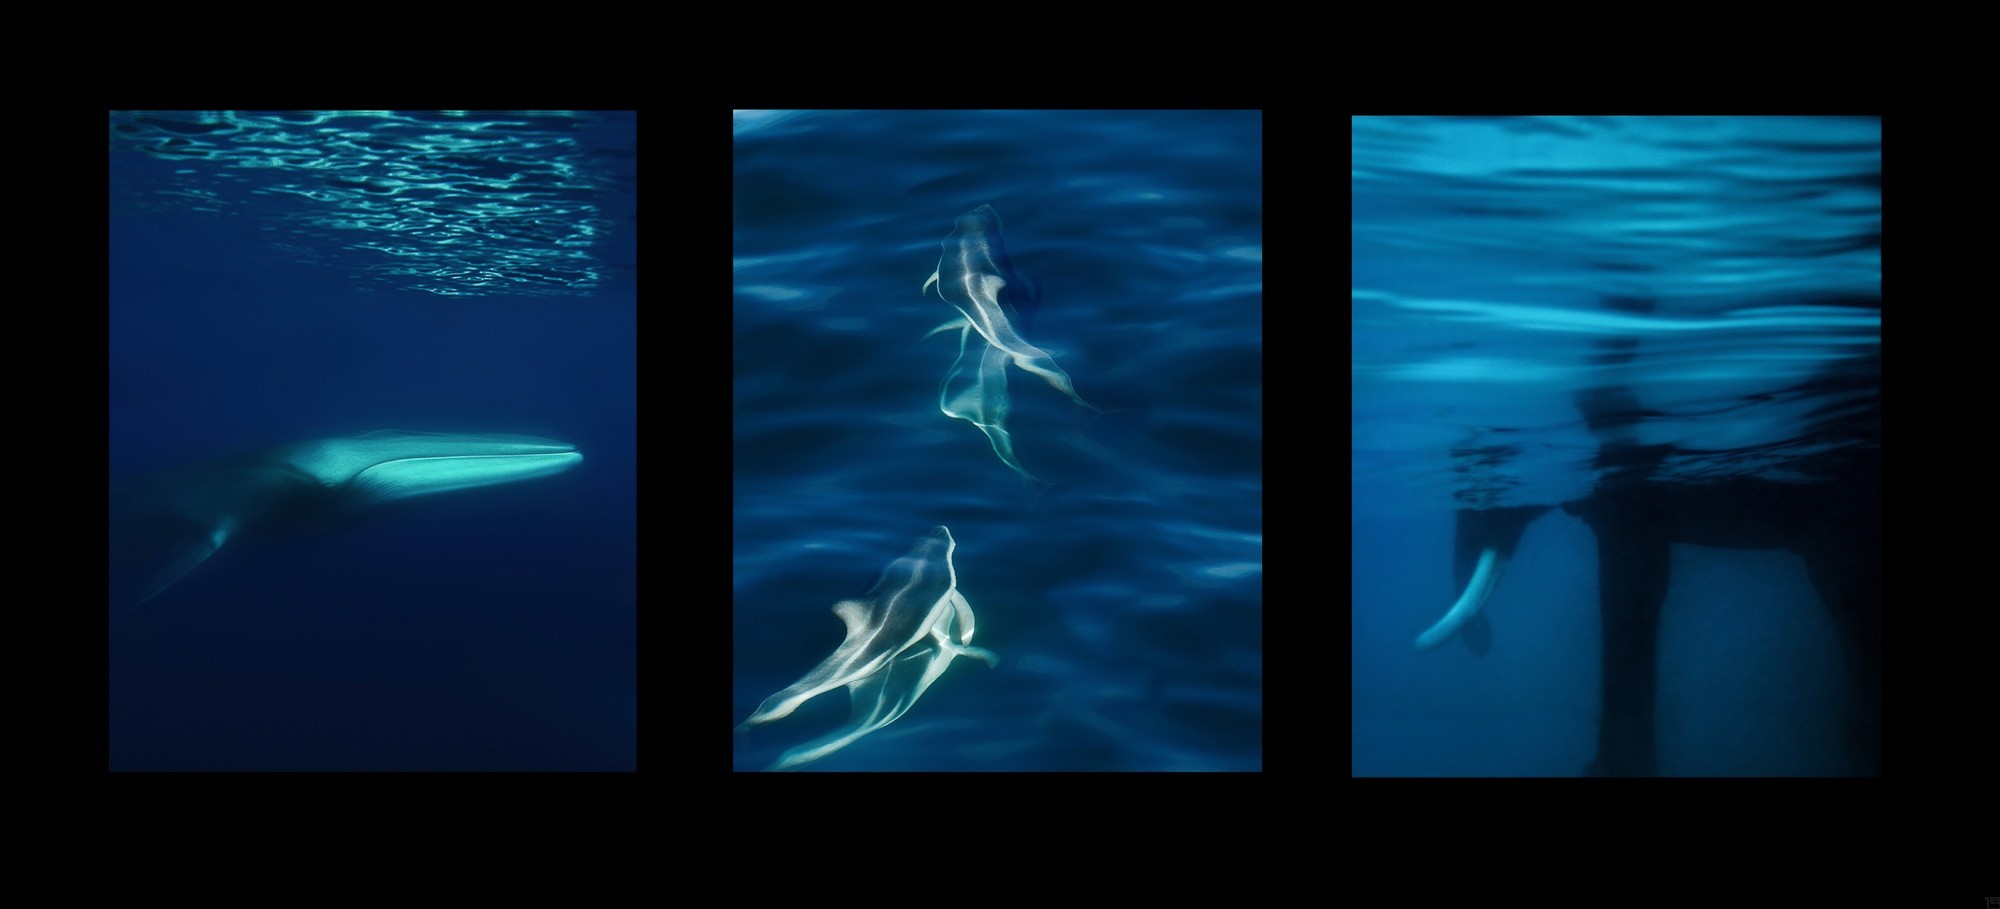 Oceans 1 - 3 | photograph by Finkbeiner & Salm, direct print on aluminium dibond, limited edition 50+2 - 02